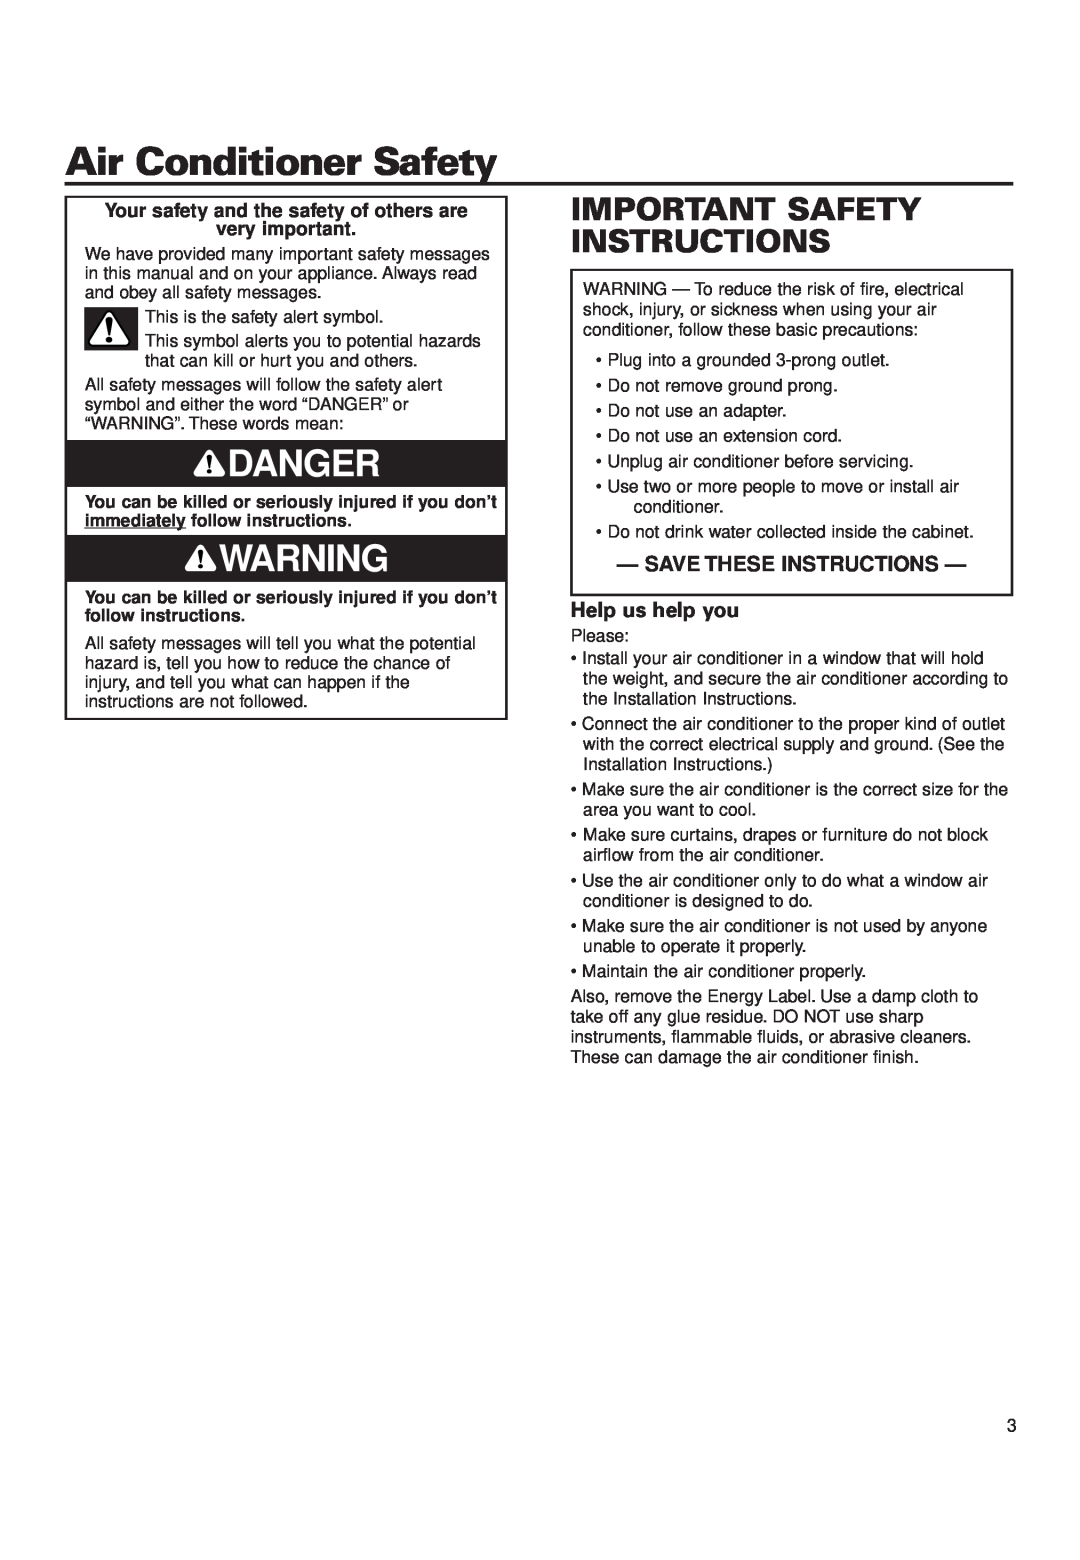 Whirlpool 4380701 Air Conditioner Safety, Danger, Important Safety Instructions, Save These Instructions, Help us help you 